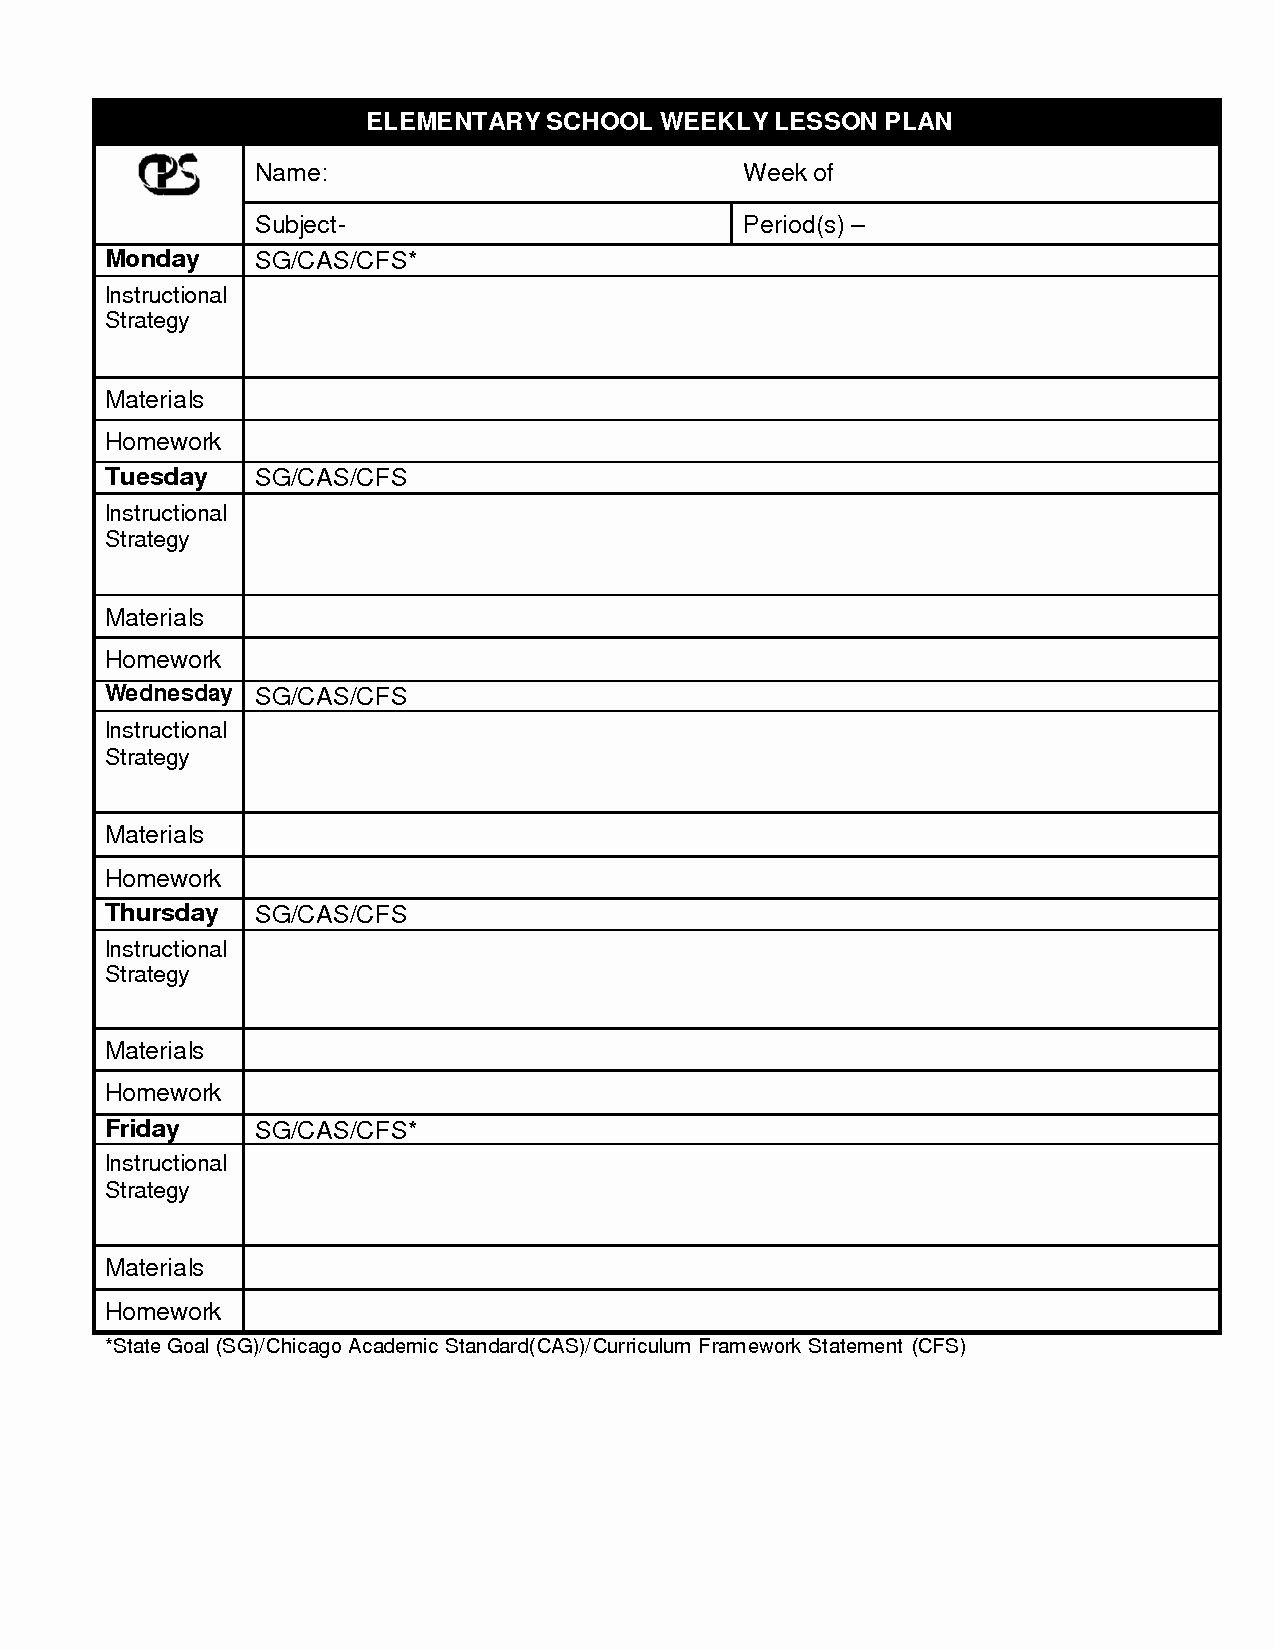 Elementary School Lesson Plan 30 Free Lesson Plan Template Elementary In 2020